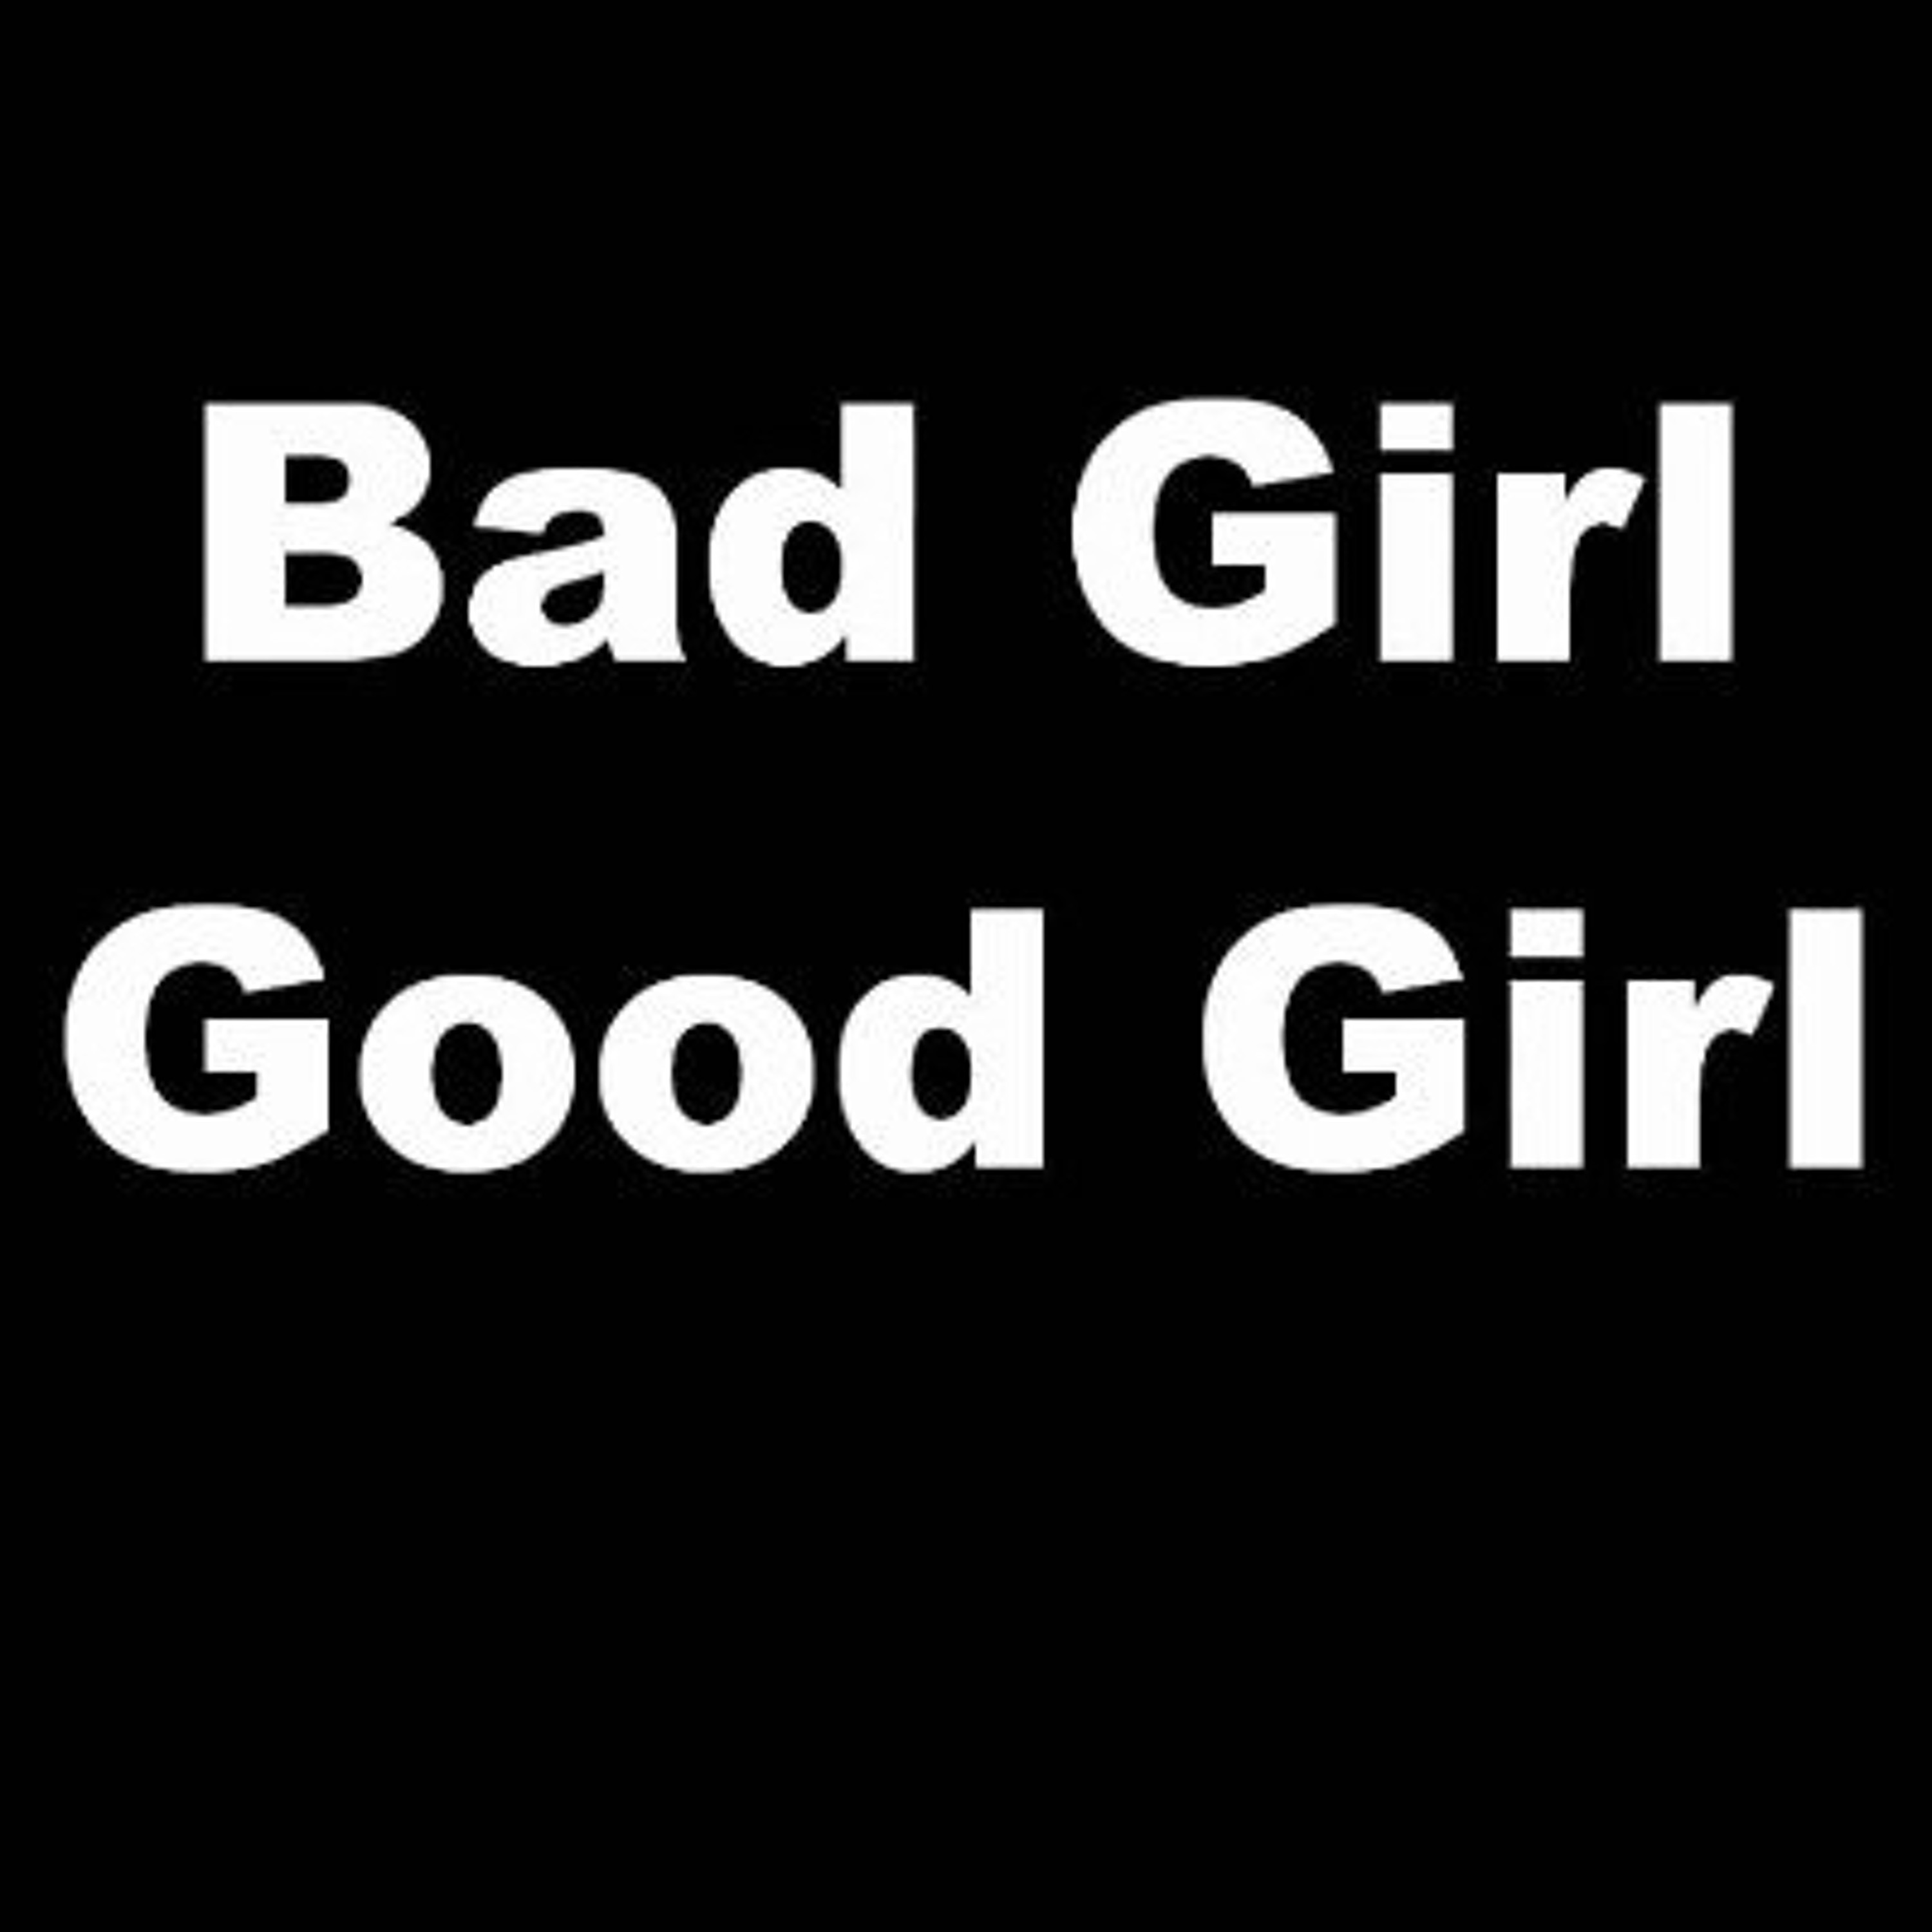 Bad Girl Good Girl Show Ep50: Find Your Strength !! 8/23/22